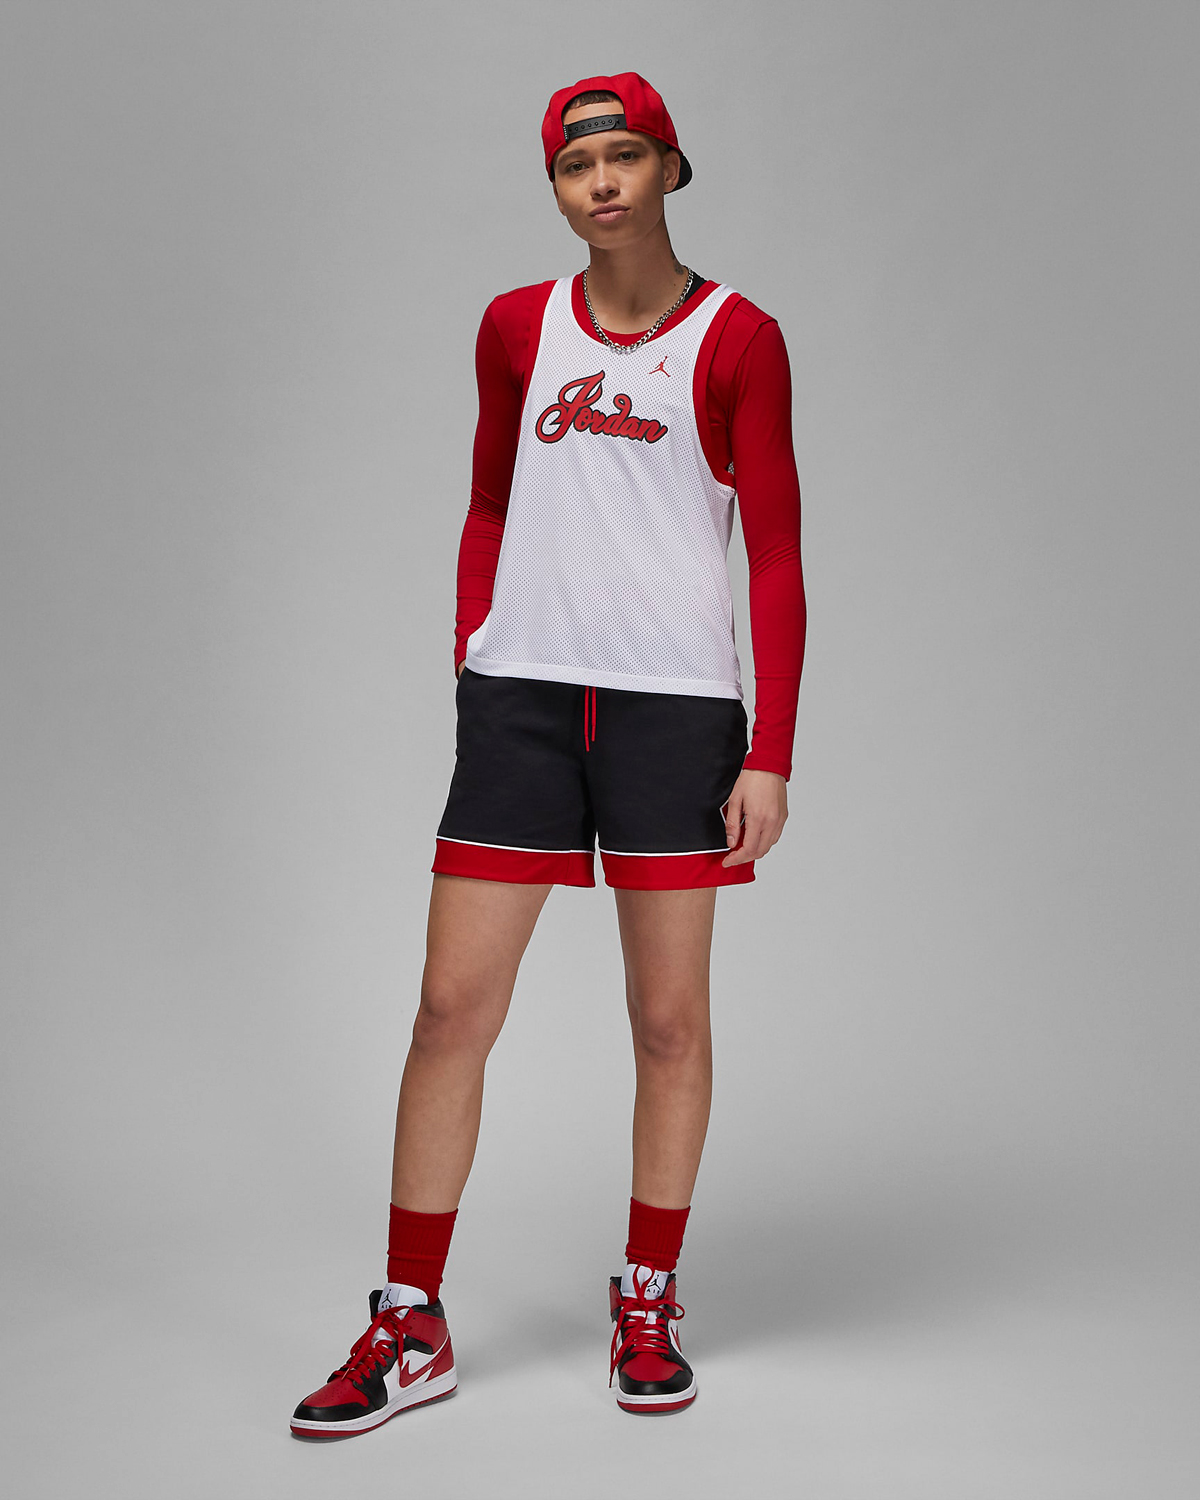 Jordan-Womens-Jersey-White-Gym-Red-Outfit